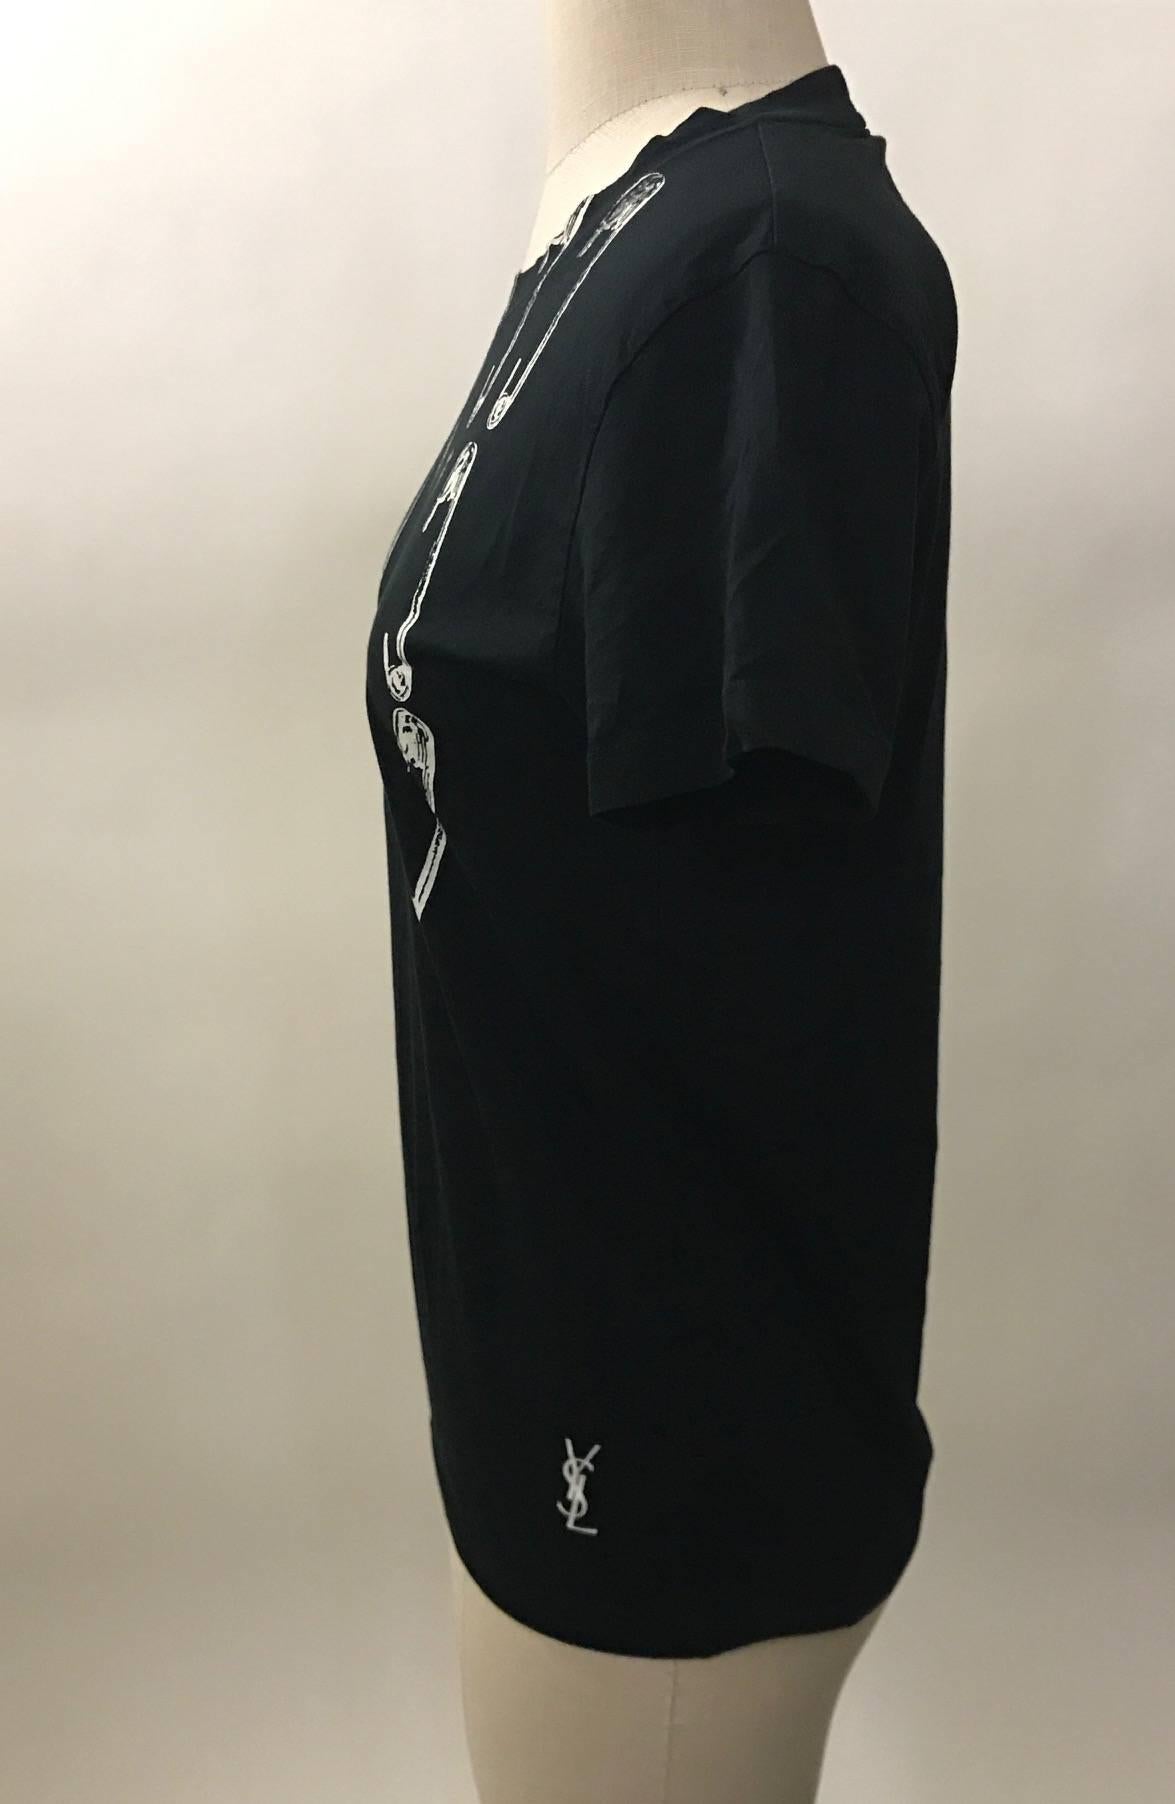 Yves Saint Laurent short sleeve black t-shirt with white screen printed safety pins and YSL logo at bottom side. Crew neck.

100% cotton.

Made in Italy.

Size IT 38, best fits XS. Light stretch, measurements taken unstretched.
Bust 33